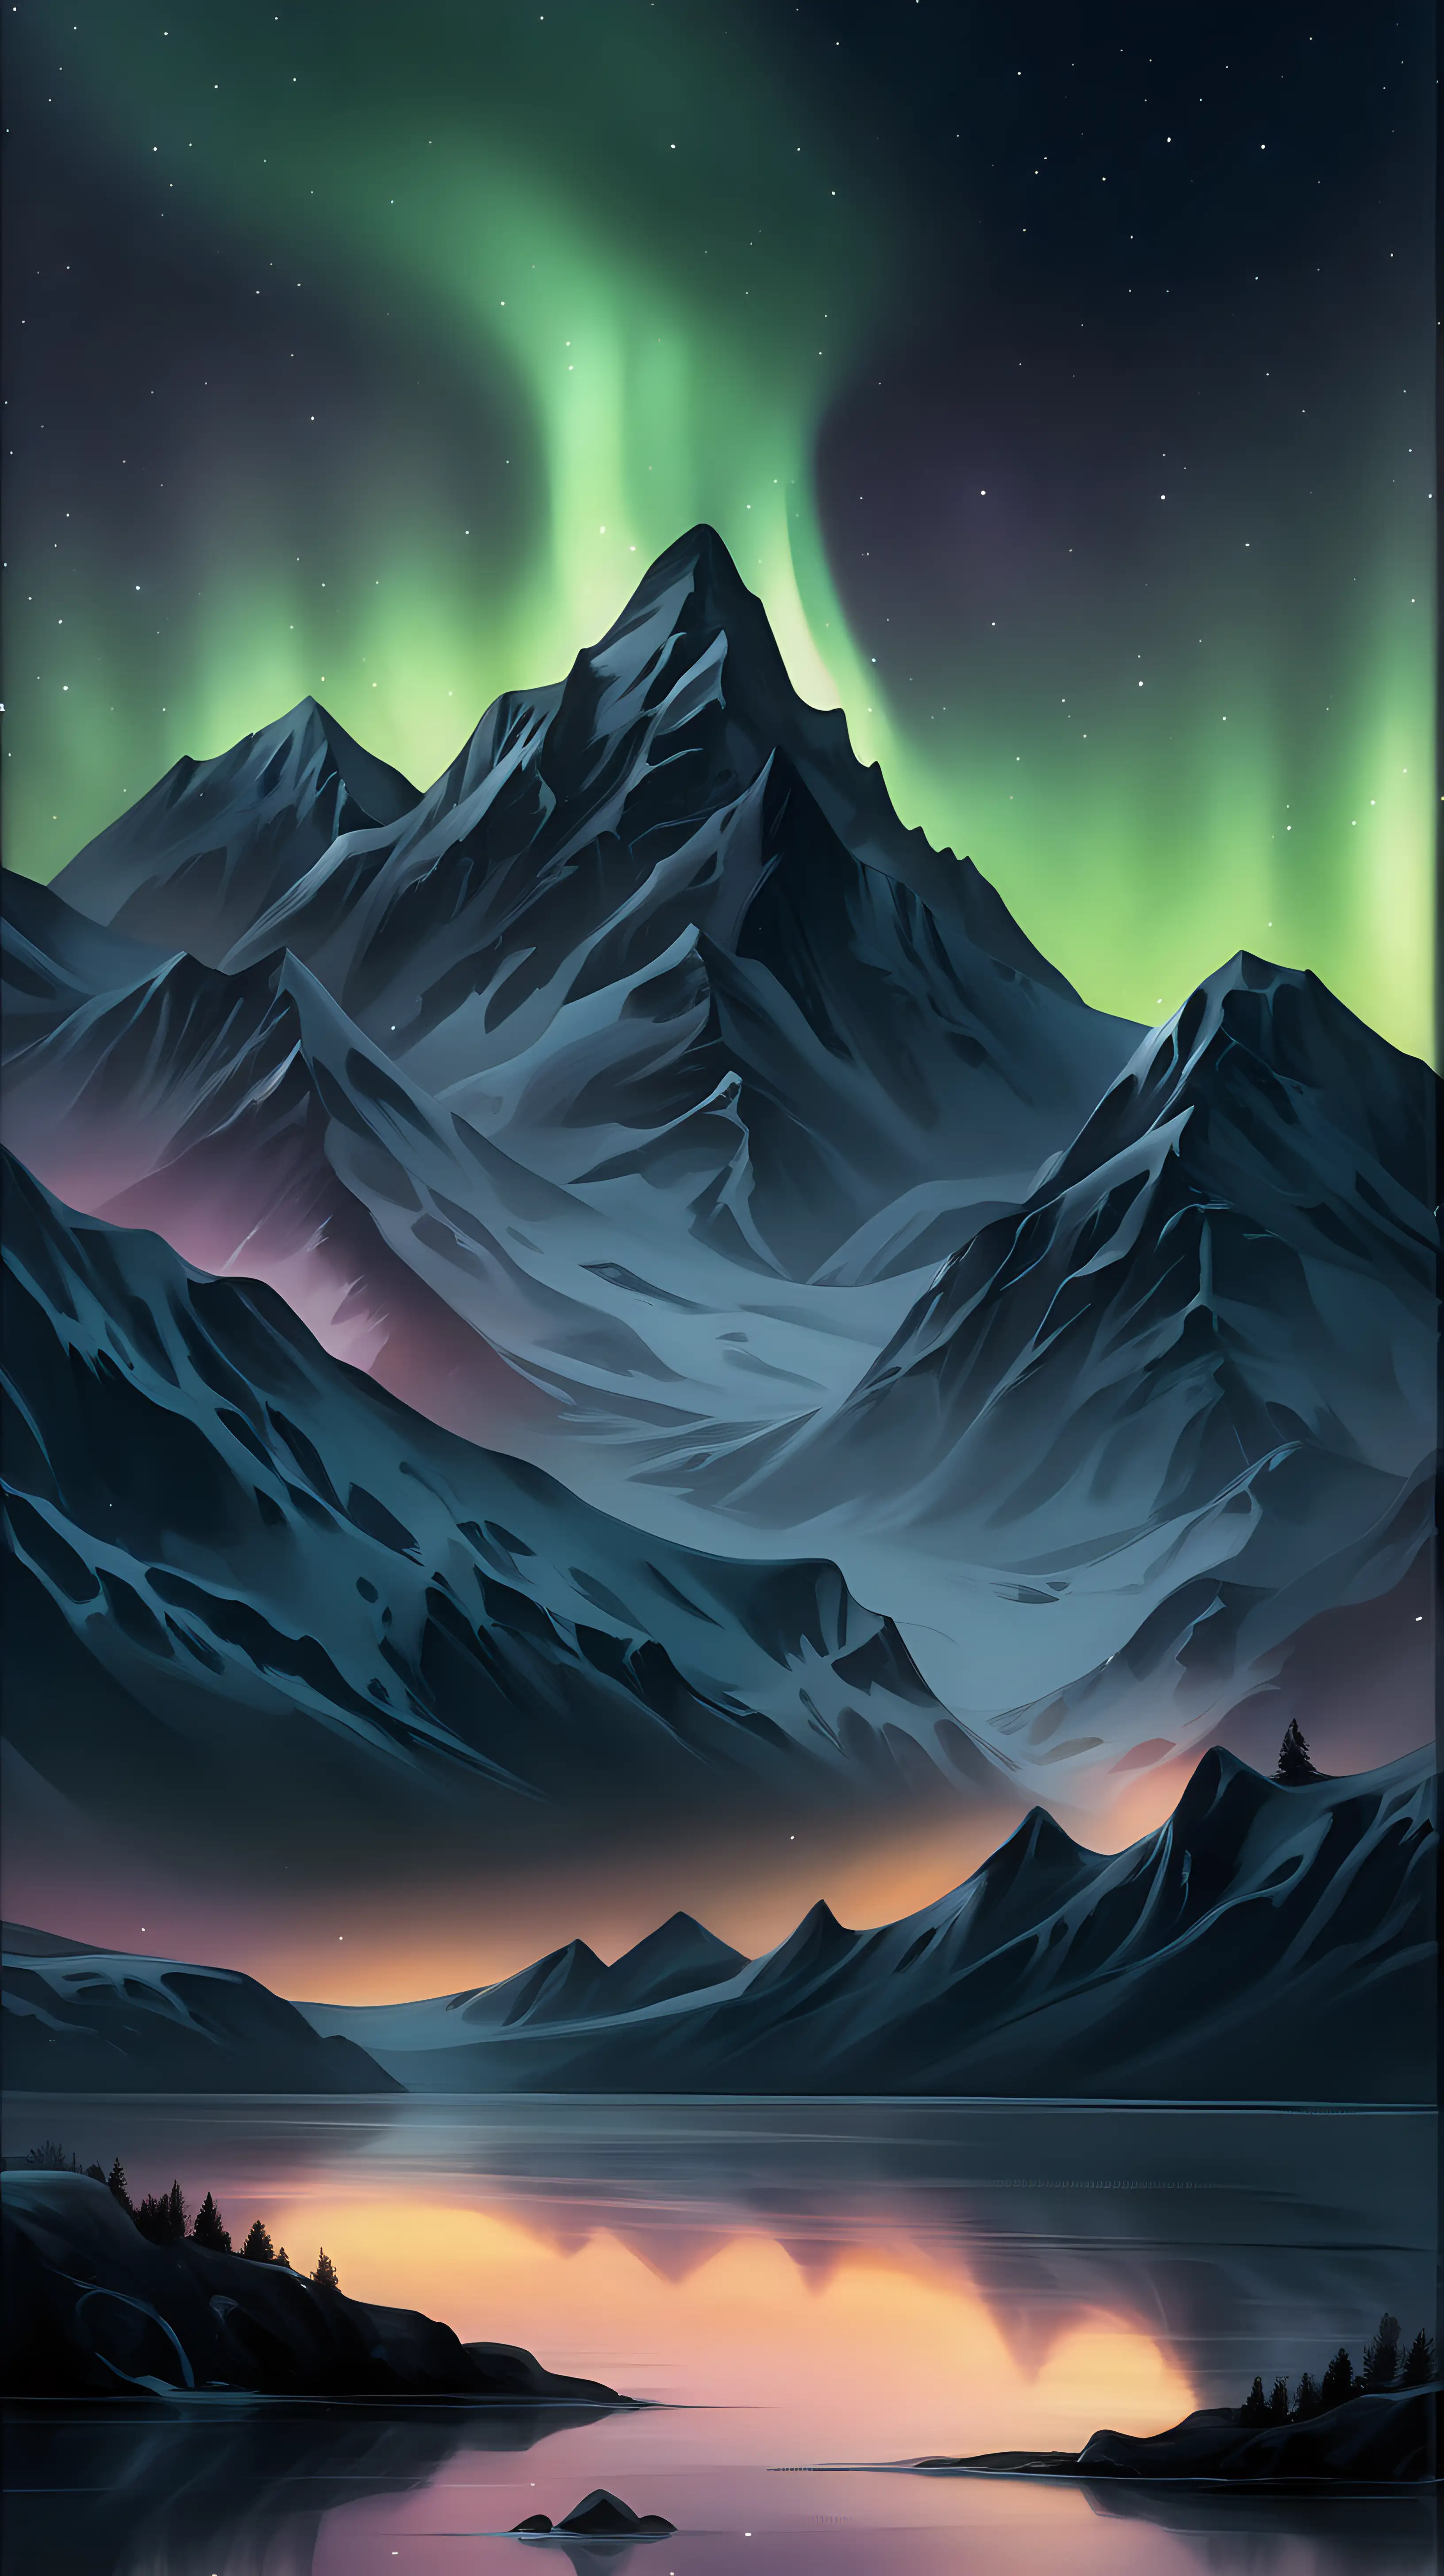 Northern Lights over Majestic Mountain Silhouette